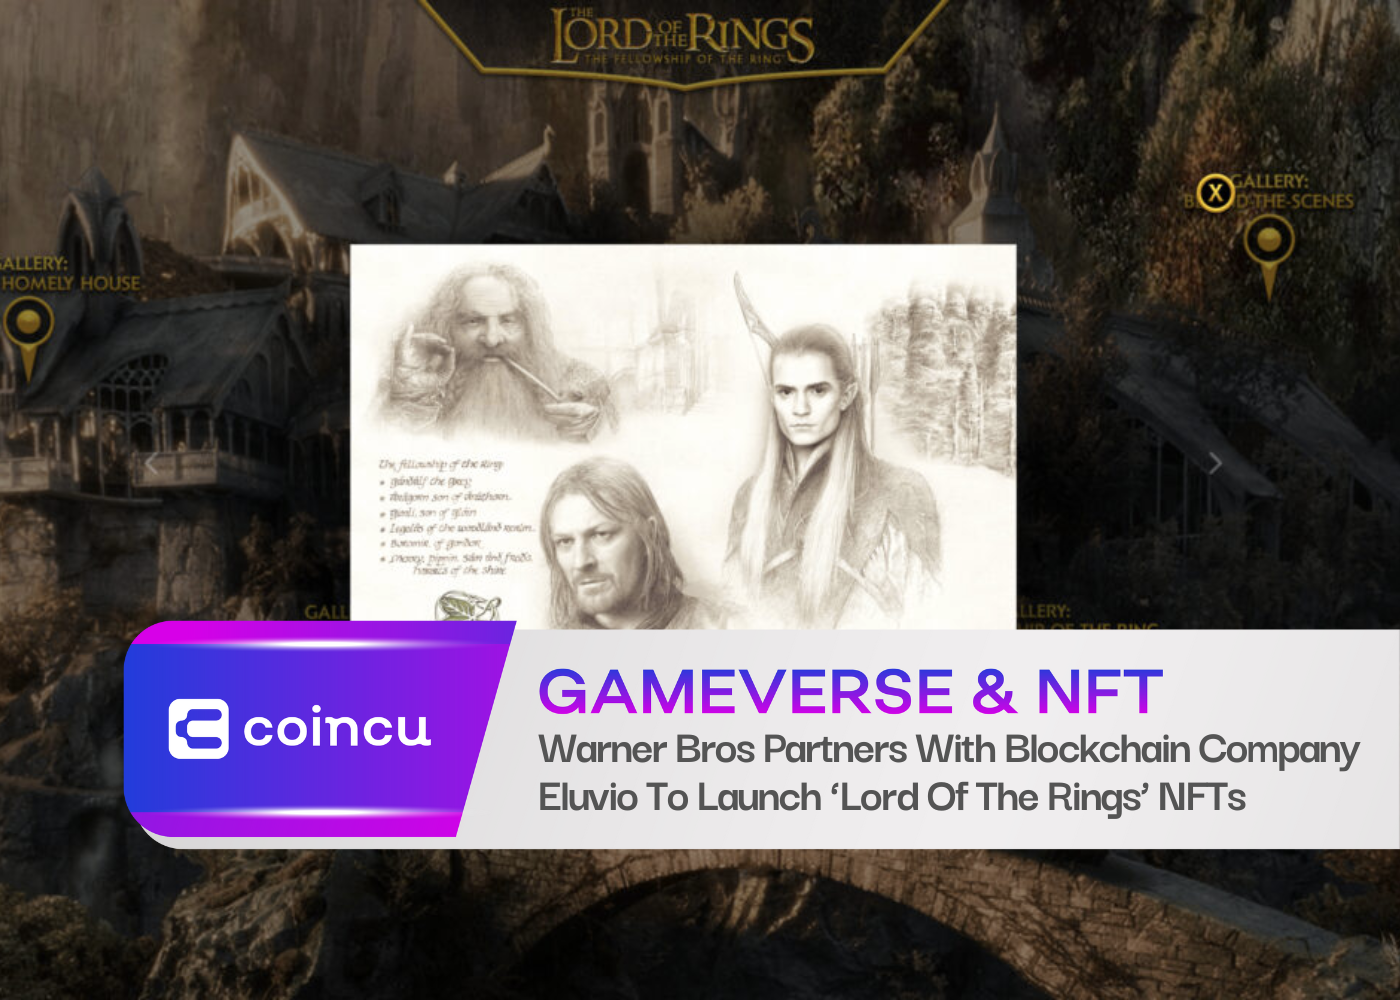 Warner Bros Partners With Blockchain Company Eluvio To Launch ‘Lord Of The Rings’ NFTs